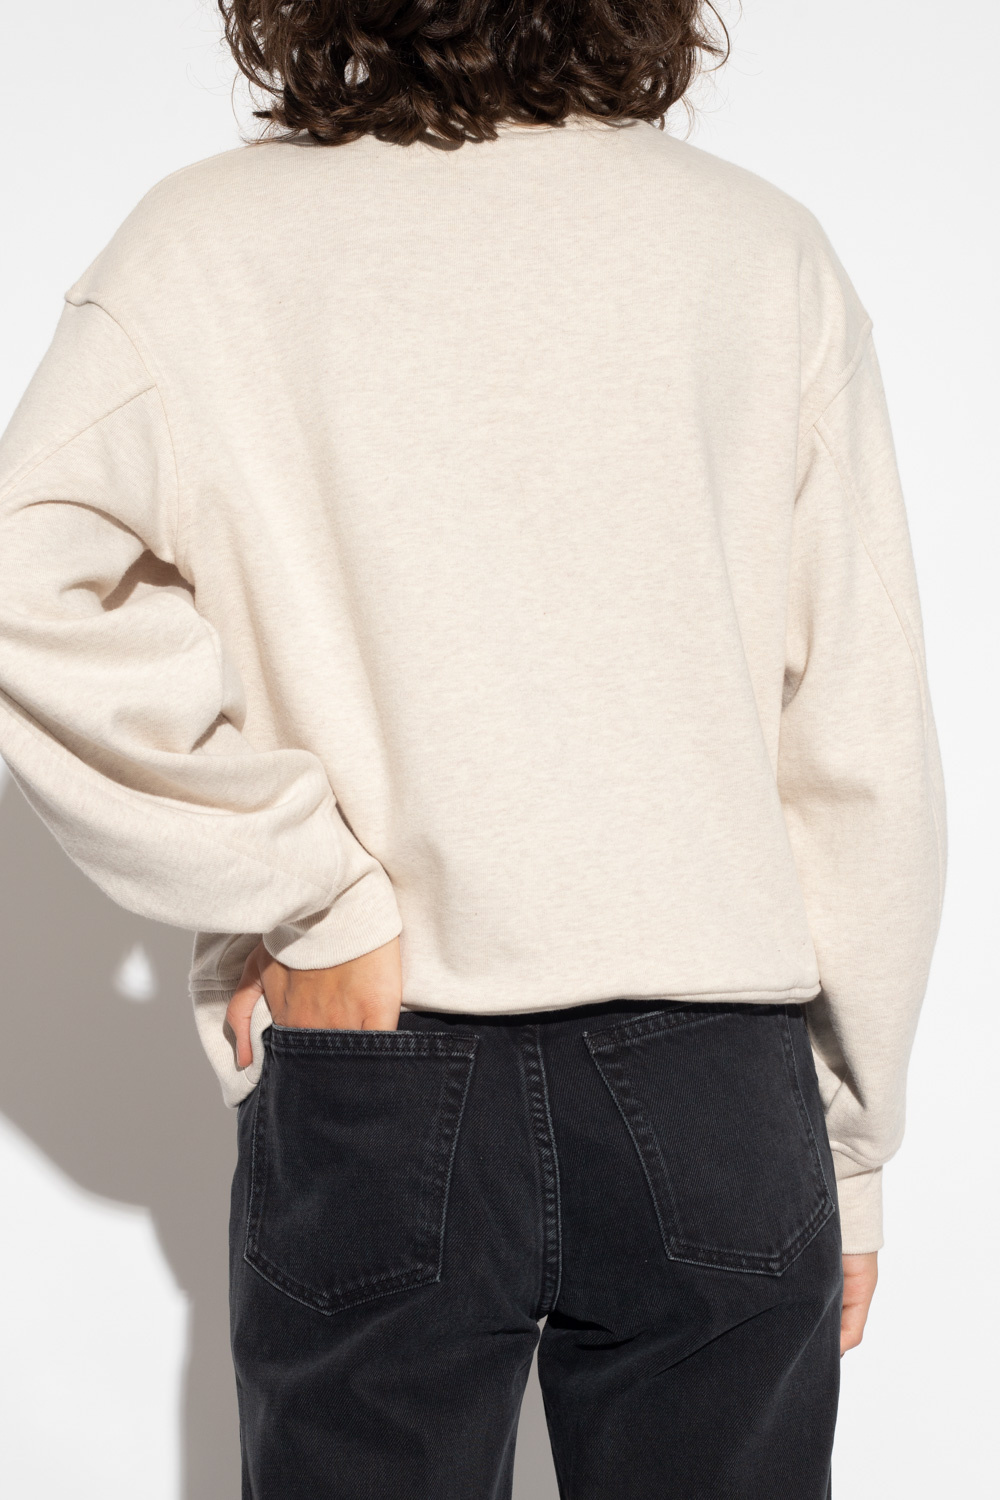 Levi's sweatshirt sleeveles ‘Made & Crafted®’ collection